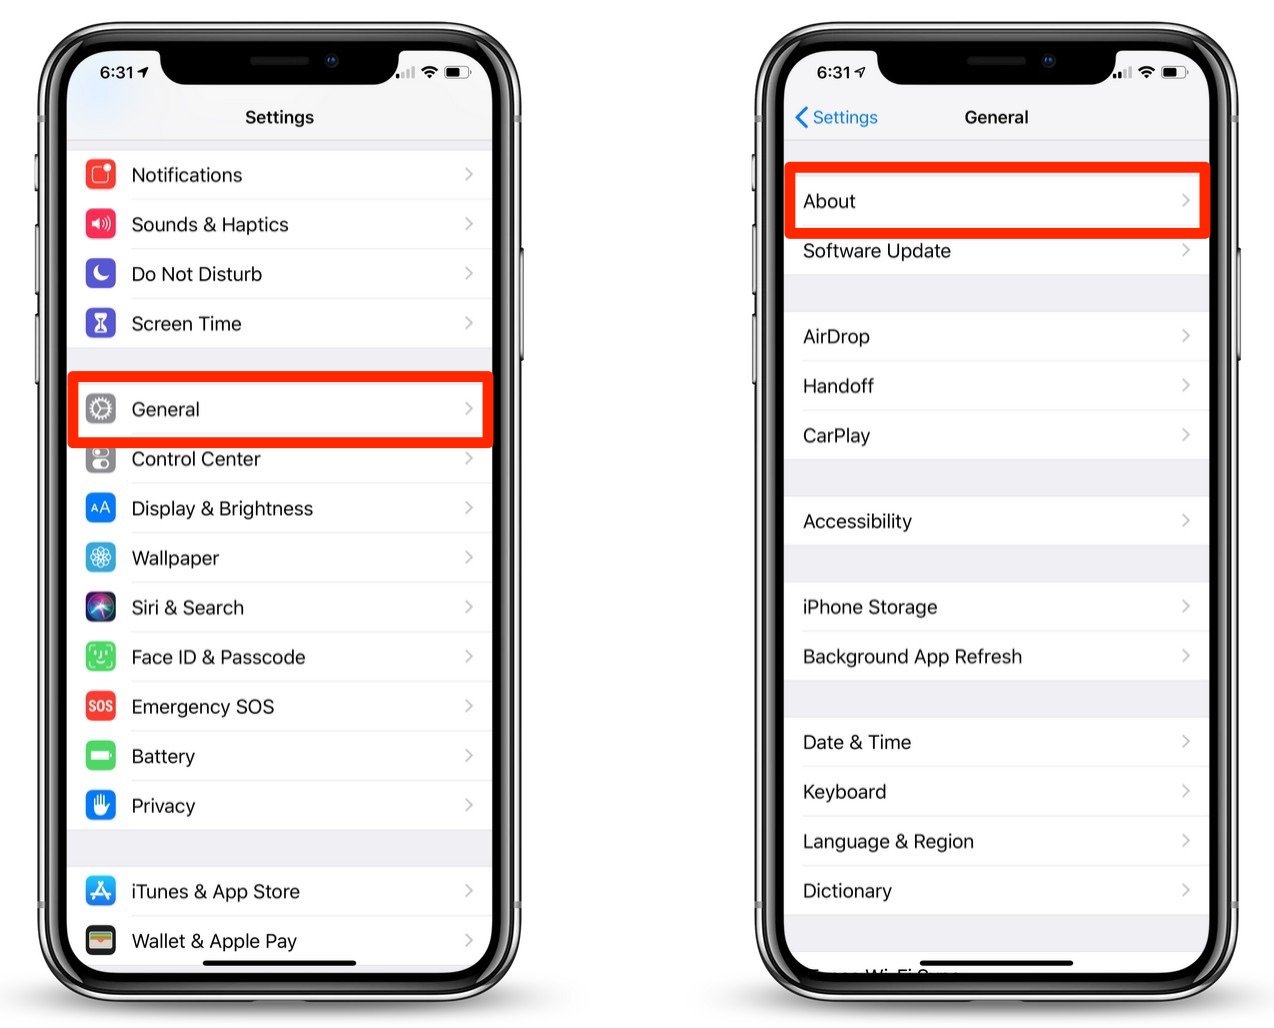 How To Change the Name of Your iPhone or iPad